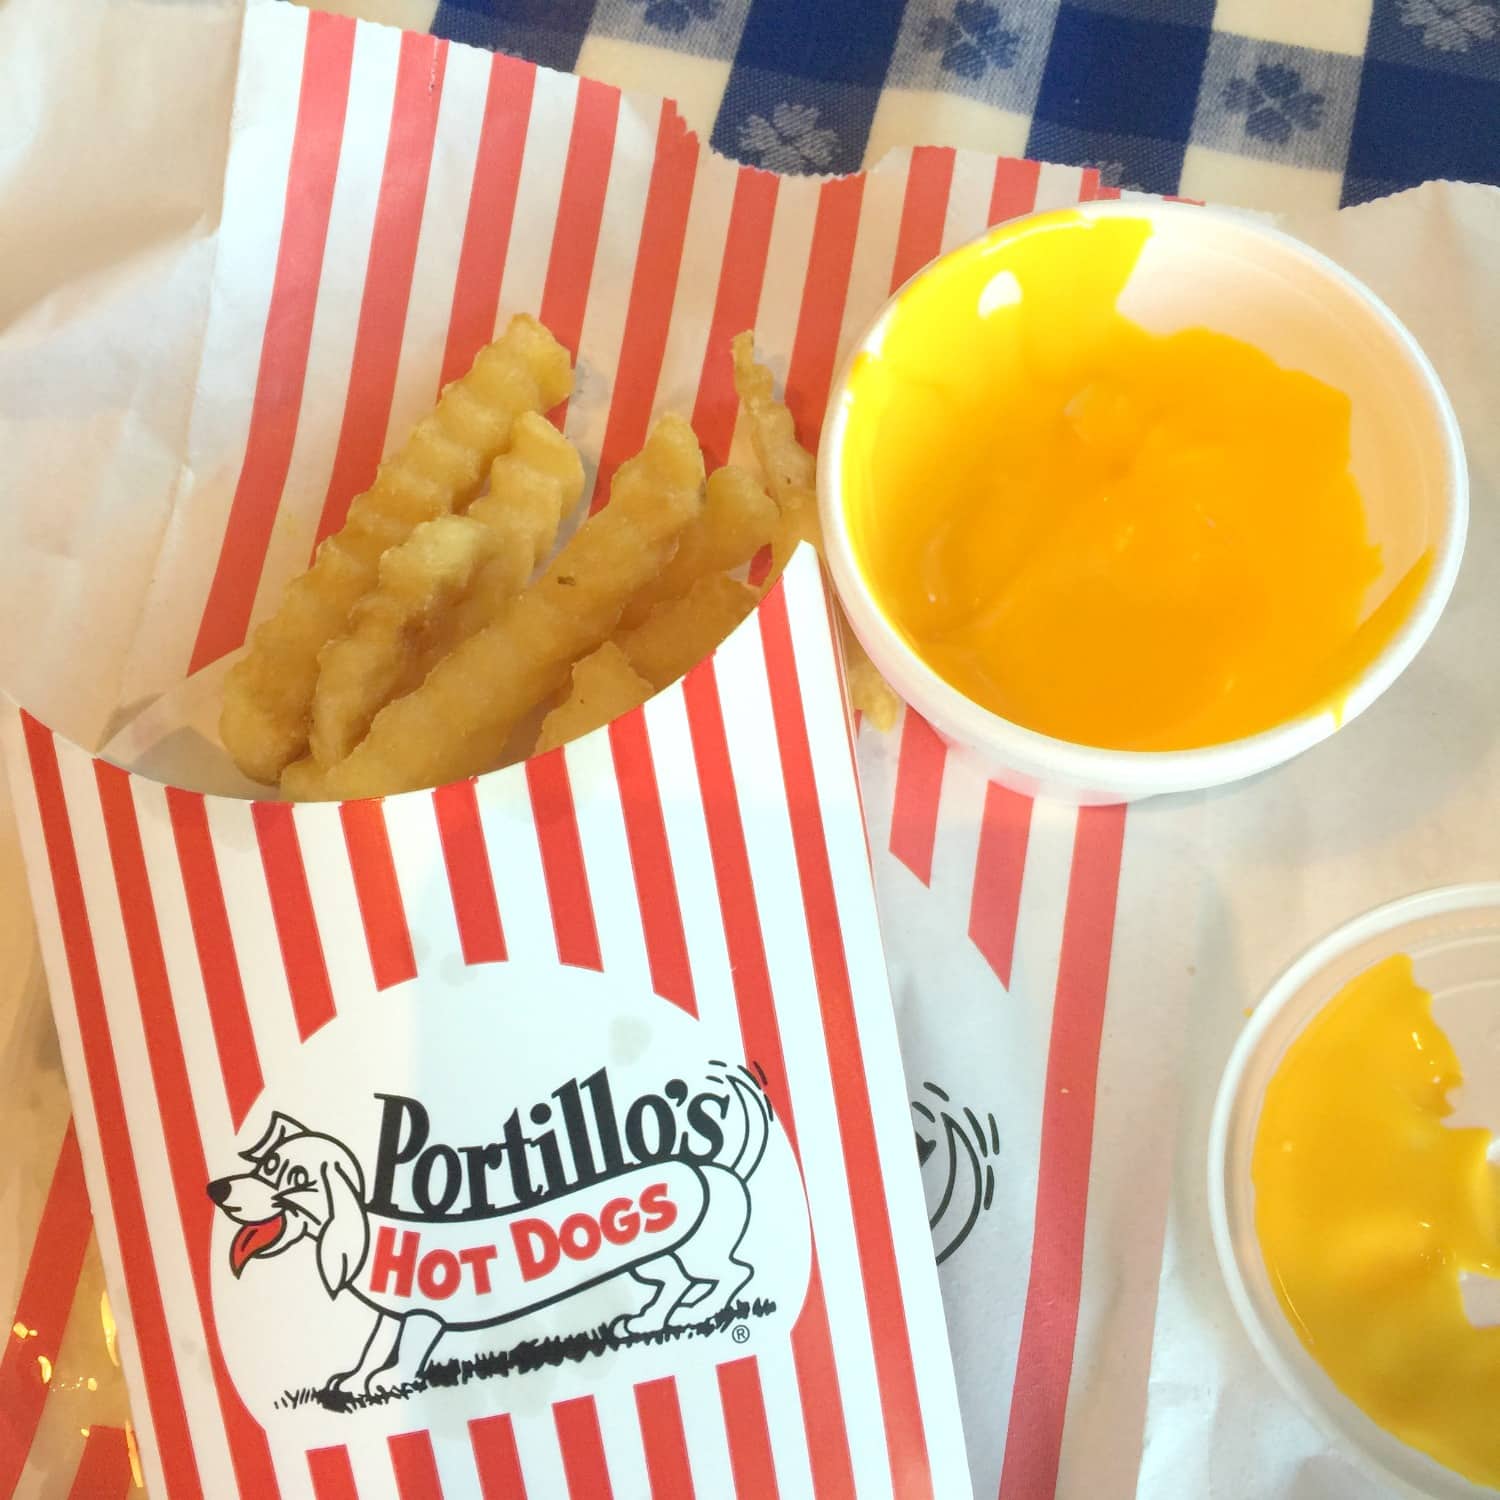 The world's best cheese fries at Portillo's Hot Dogs in Tampa | Tampa Florida Travel Guide | Marry Me on A Megabus Giveaway | Affordable Travel Options | Florida Travel Blogger Ashley Brooke Nicholas | Best places to eat in Tampa